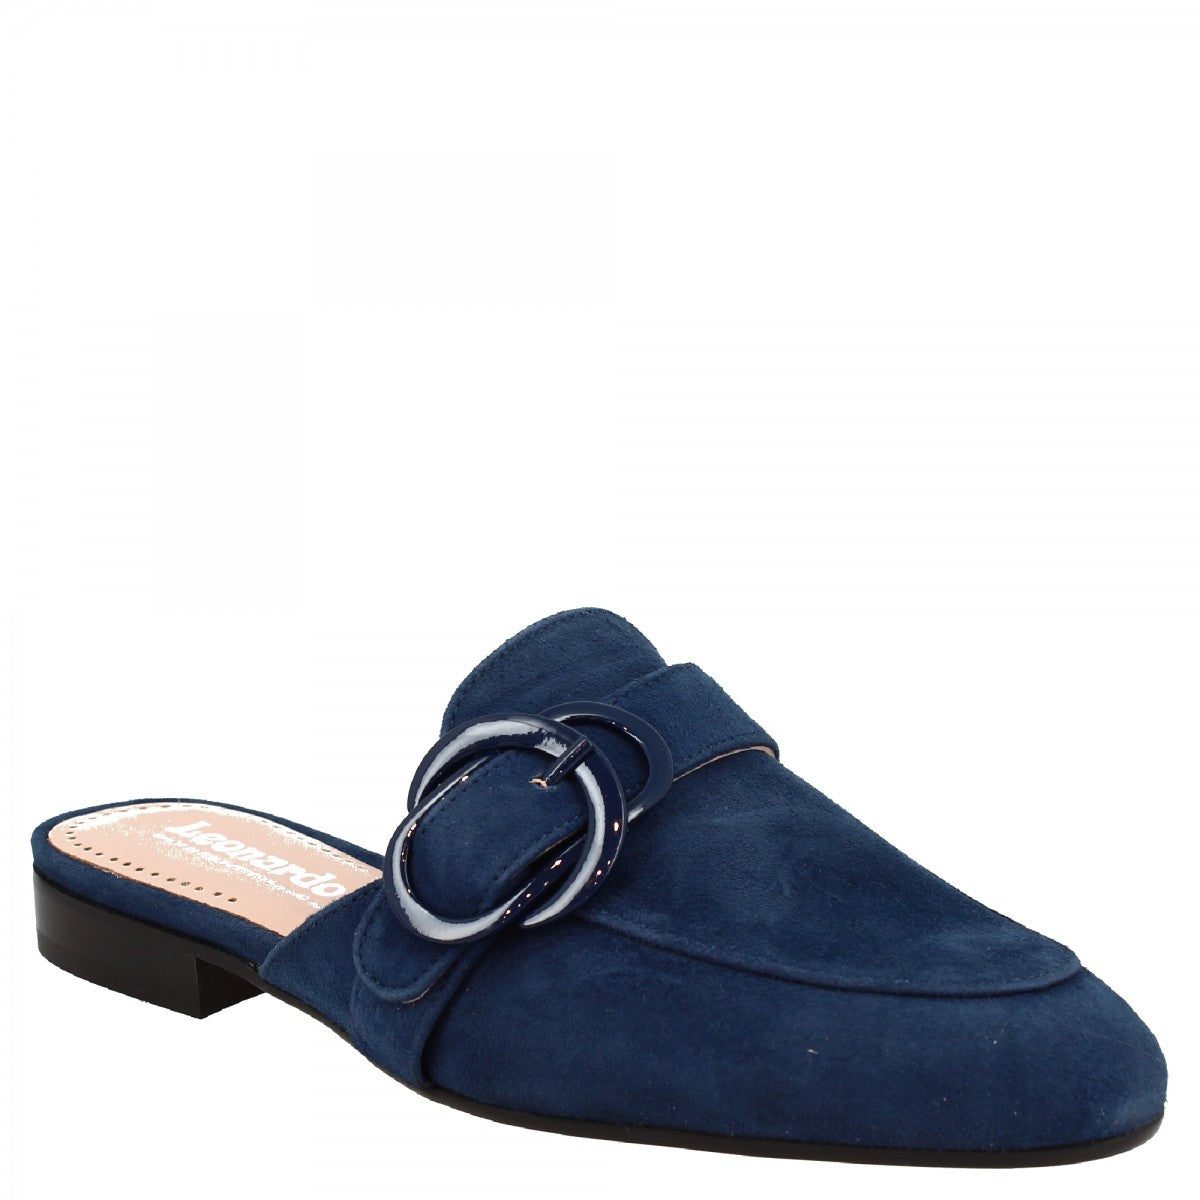 Women's handmade mules shoes with buckle in blue suede leather